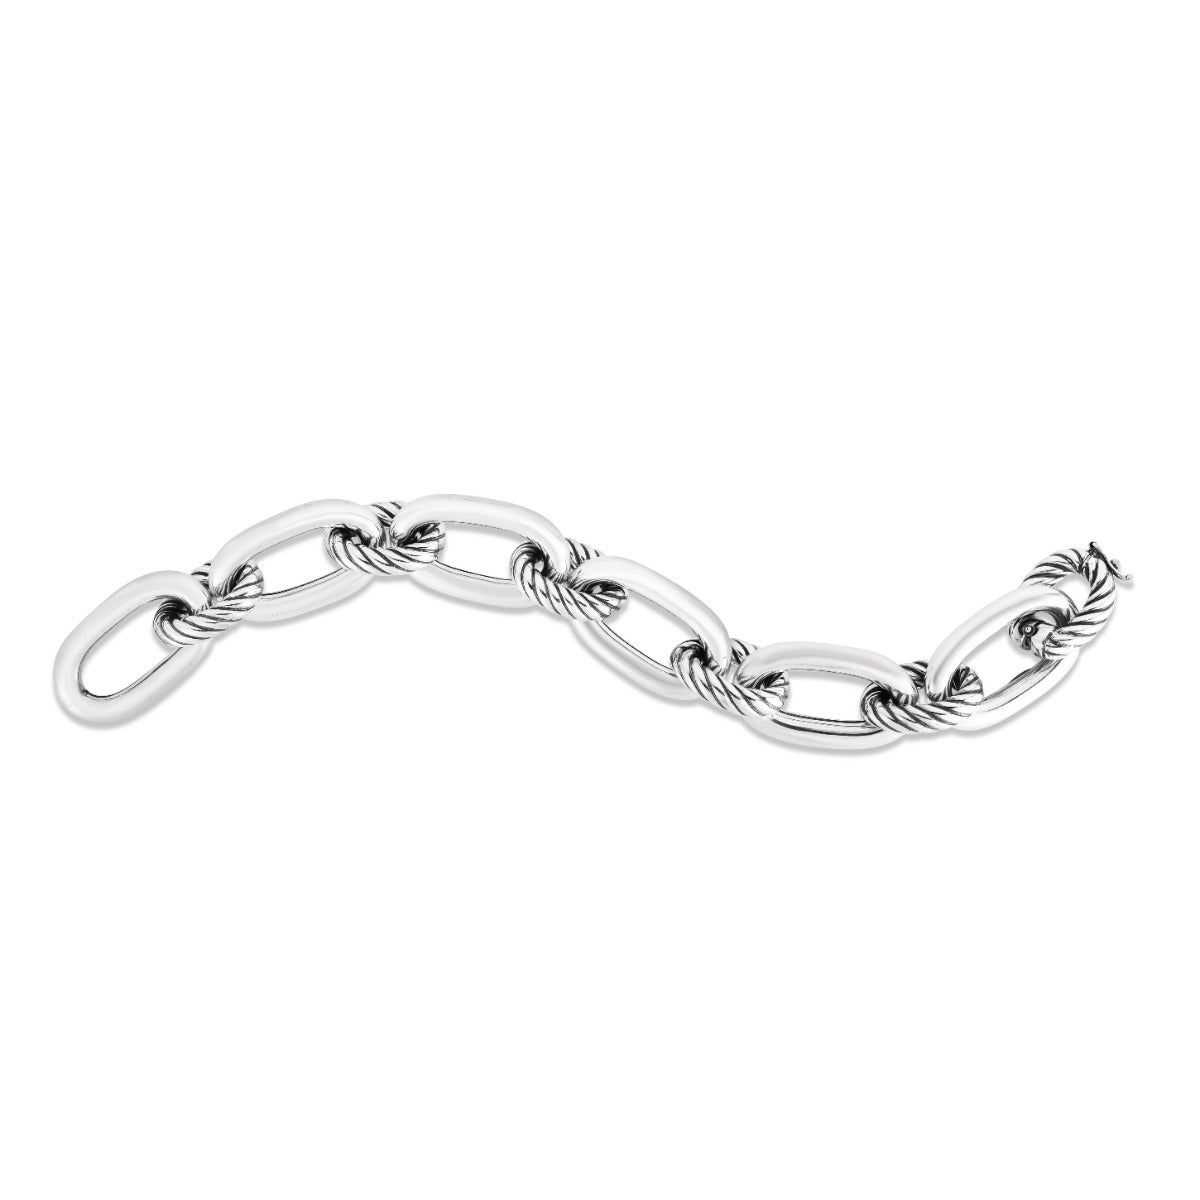 Sterling Silver Italian Cable Links Bracelet with Push-in Clasp